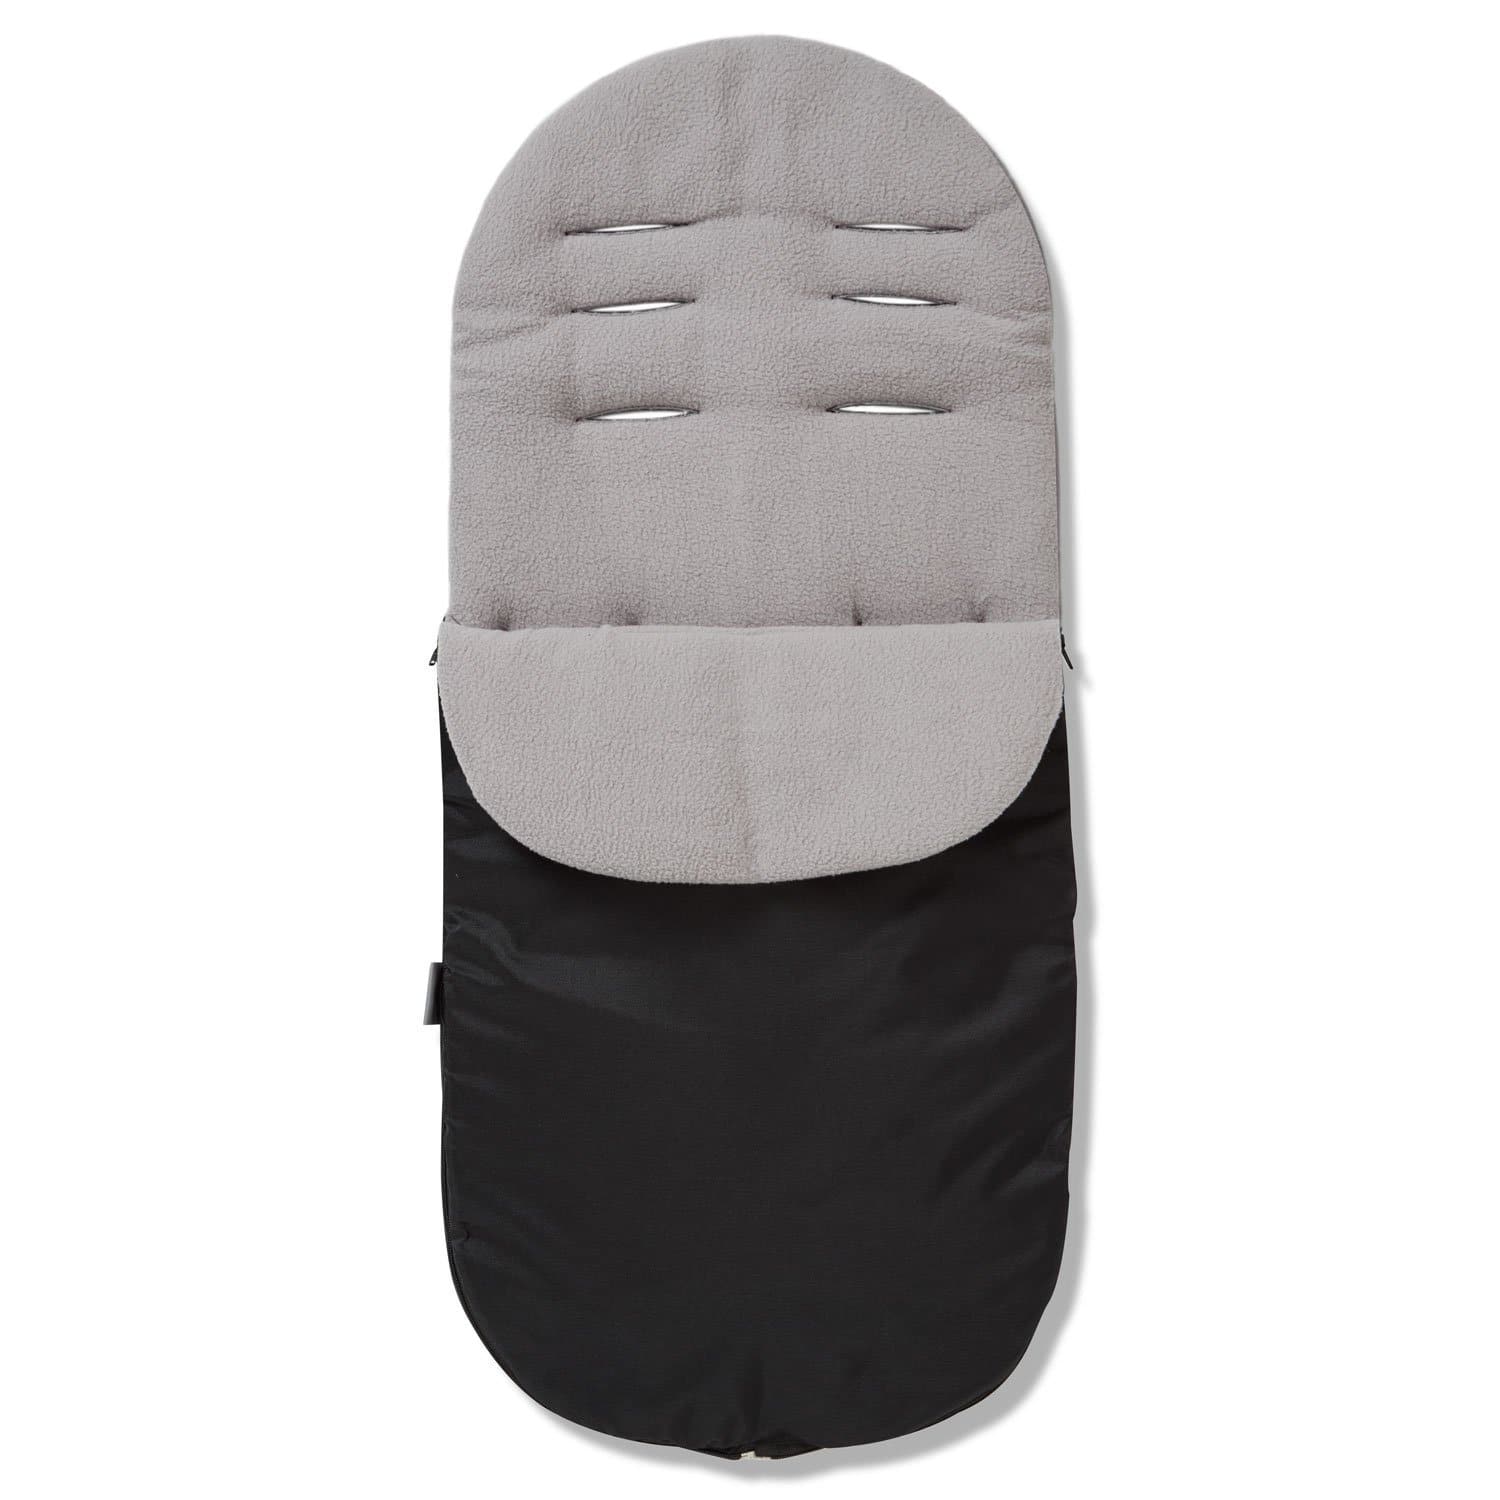 Footmuff / Cosy Toes Compatible with Babywelt - Grey / Fits All Models | For Your Little One